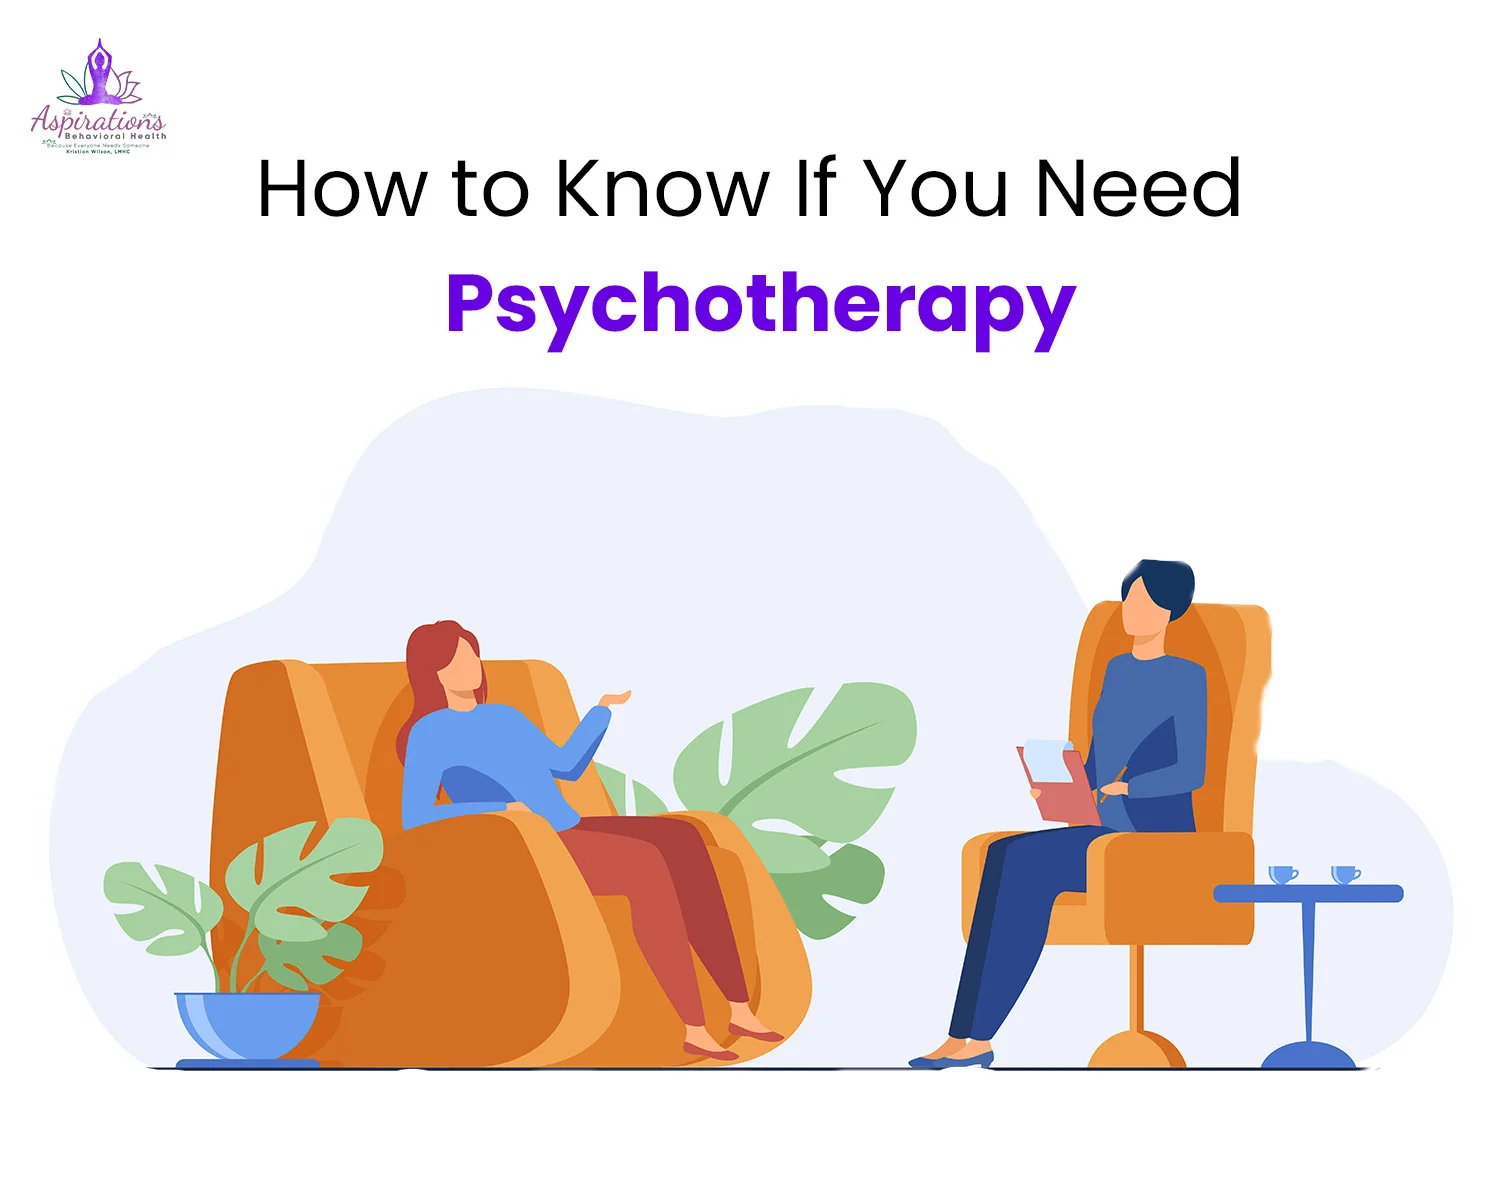 How to Know If You Need Psychotherapy